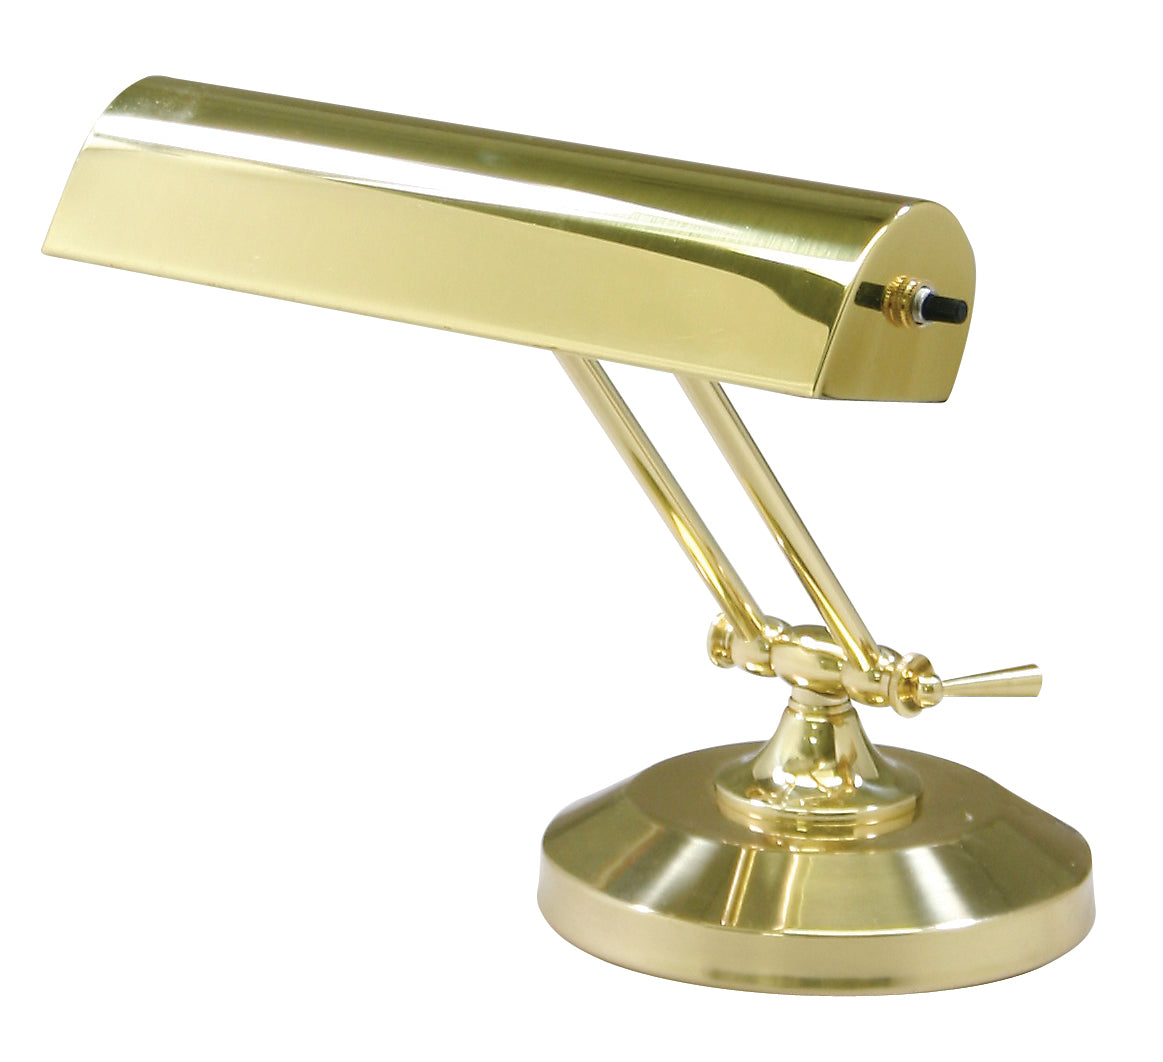 House of Troy Upright Piano Lamp 10" in Polished Brass P10-150